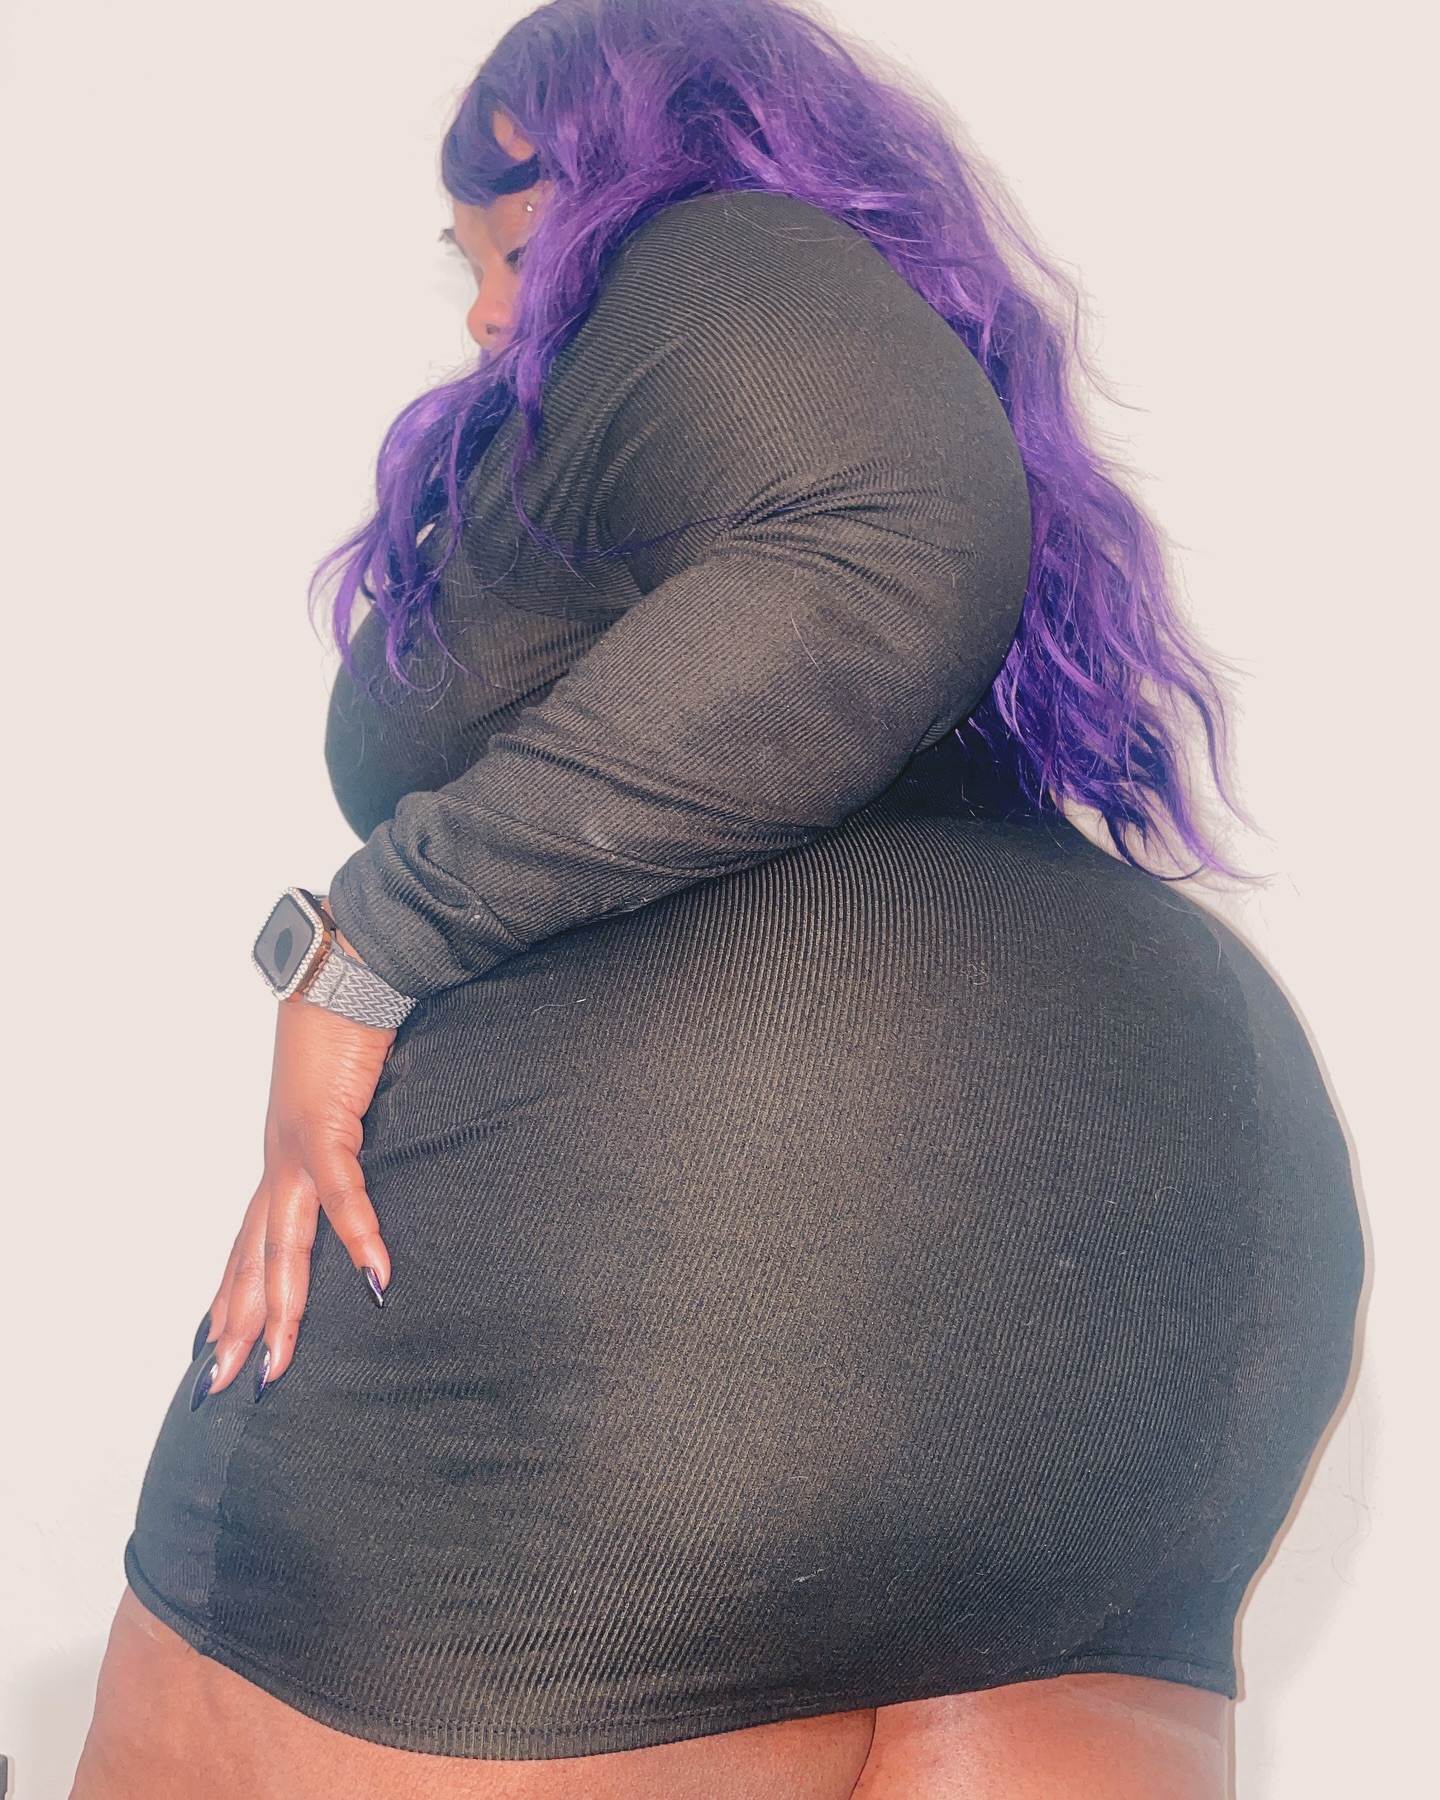 Everyday is a Worship Me day! Your Royal Thickness 💜